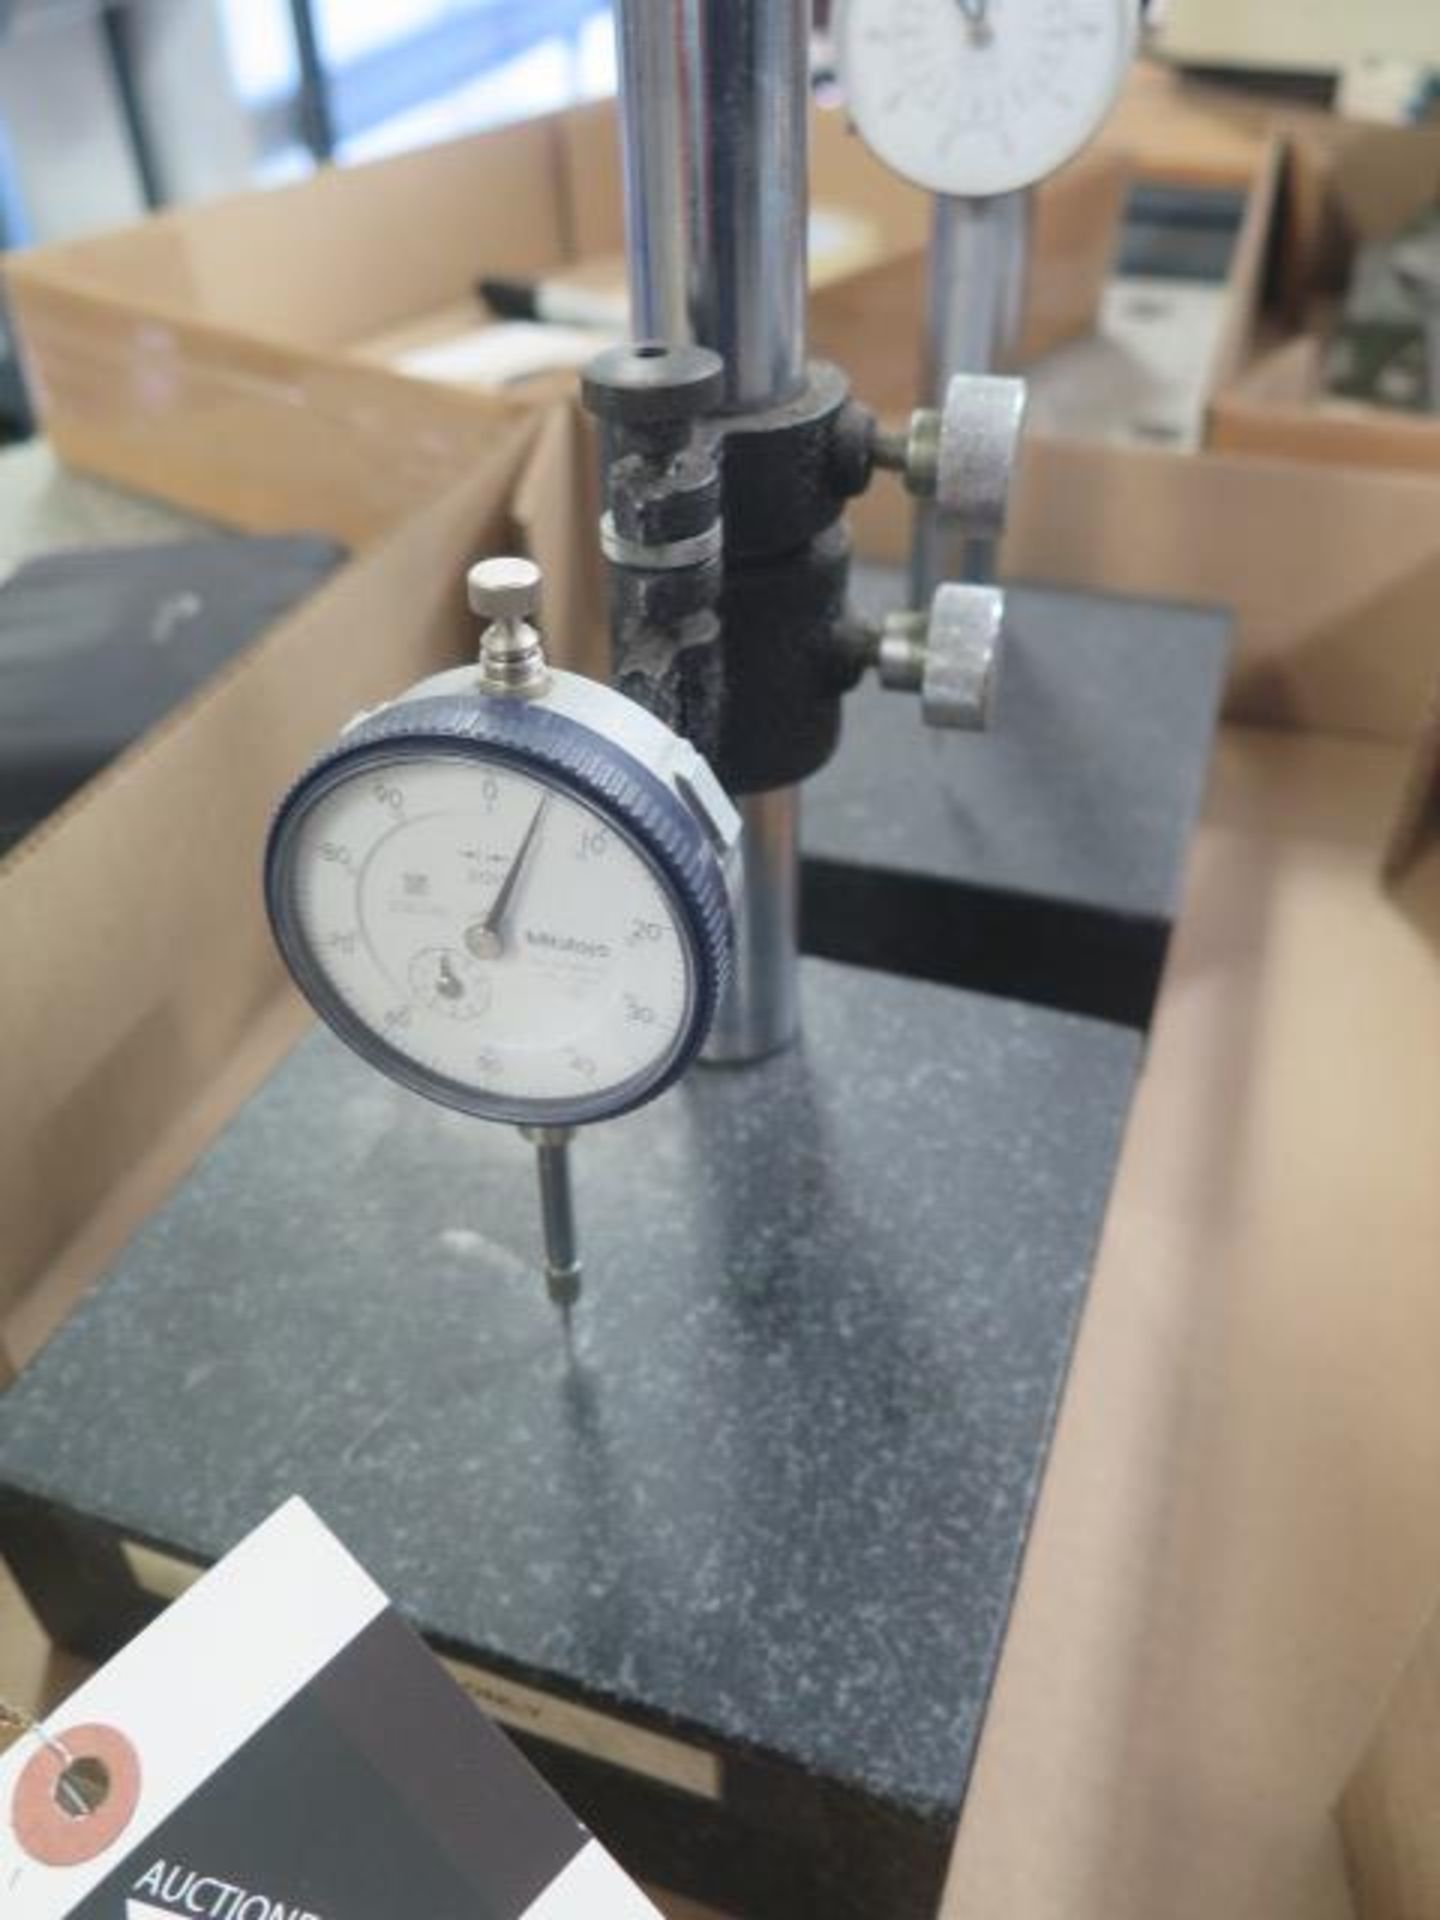 6" x 6" Granite Indicator Stands (2) w/ Dial Indicators (SOLD AS-IS - NO WARRANTY) - Image 3 of 4